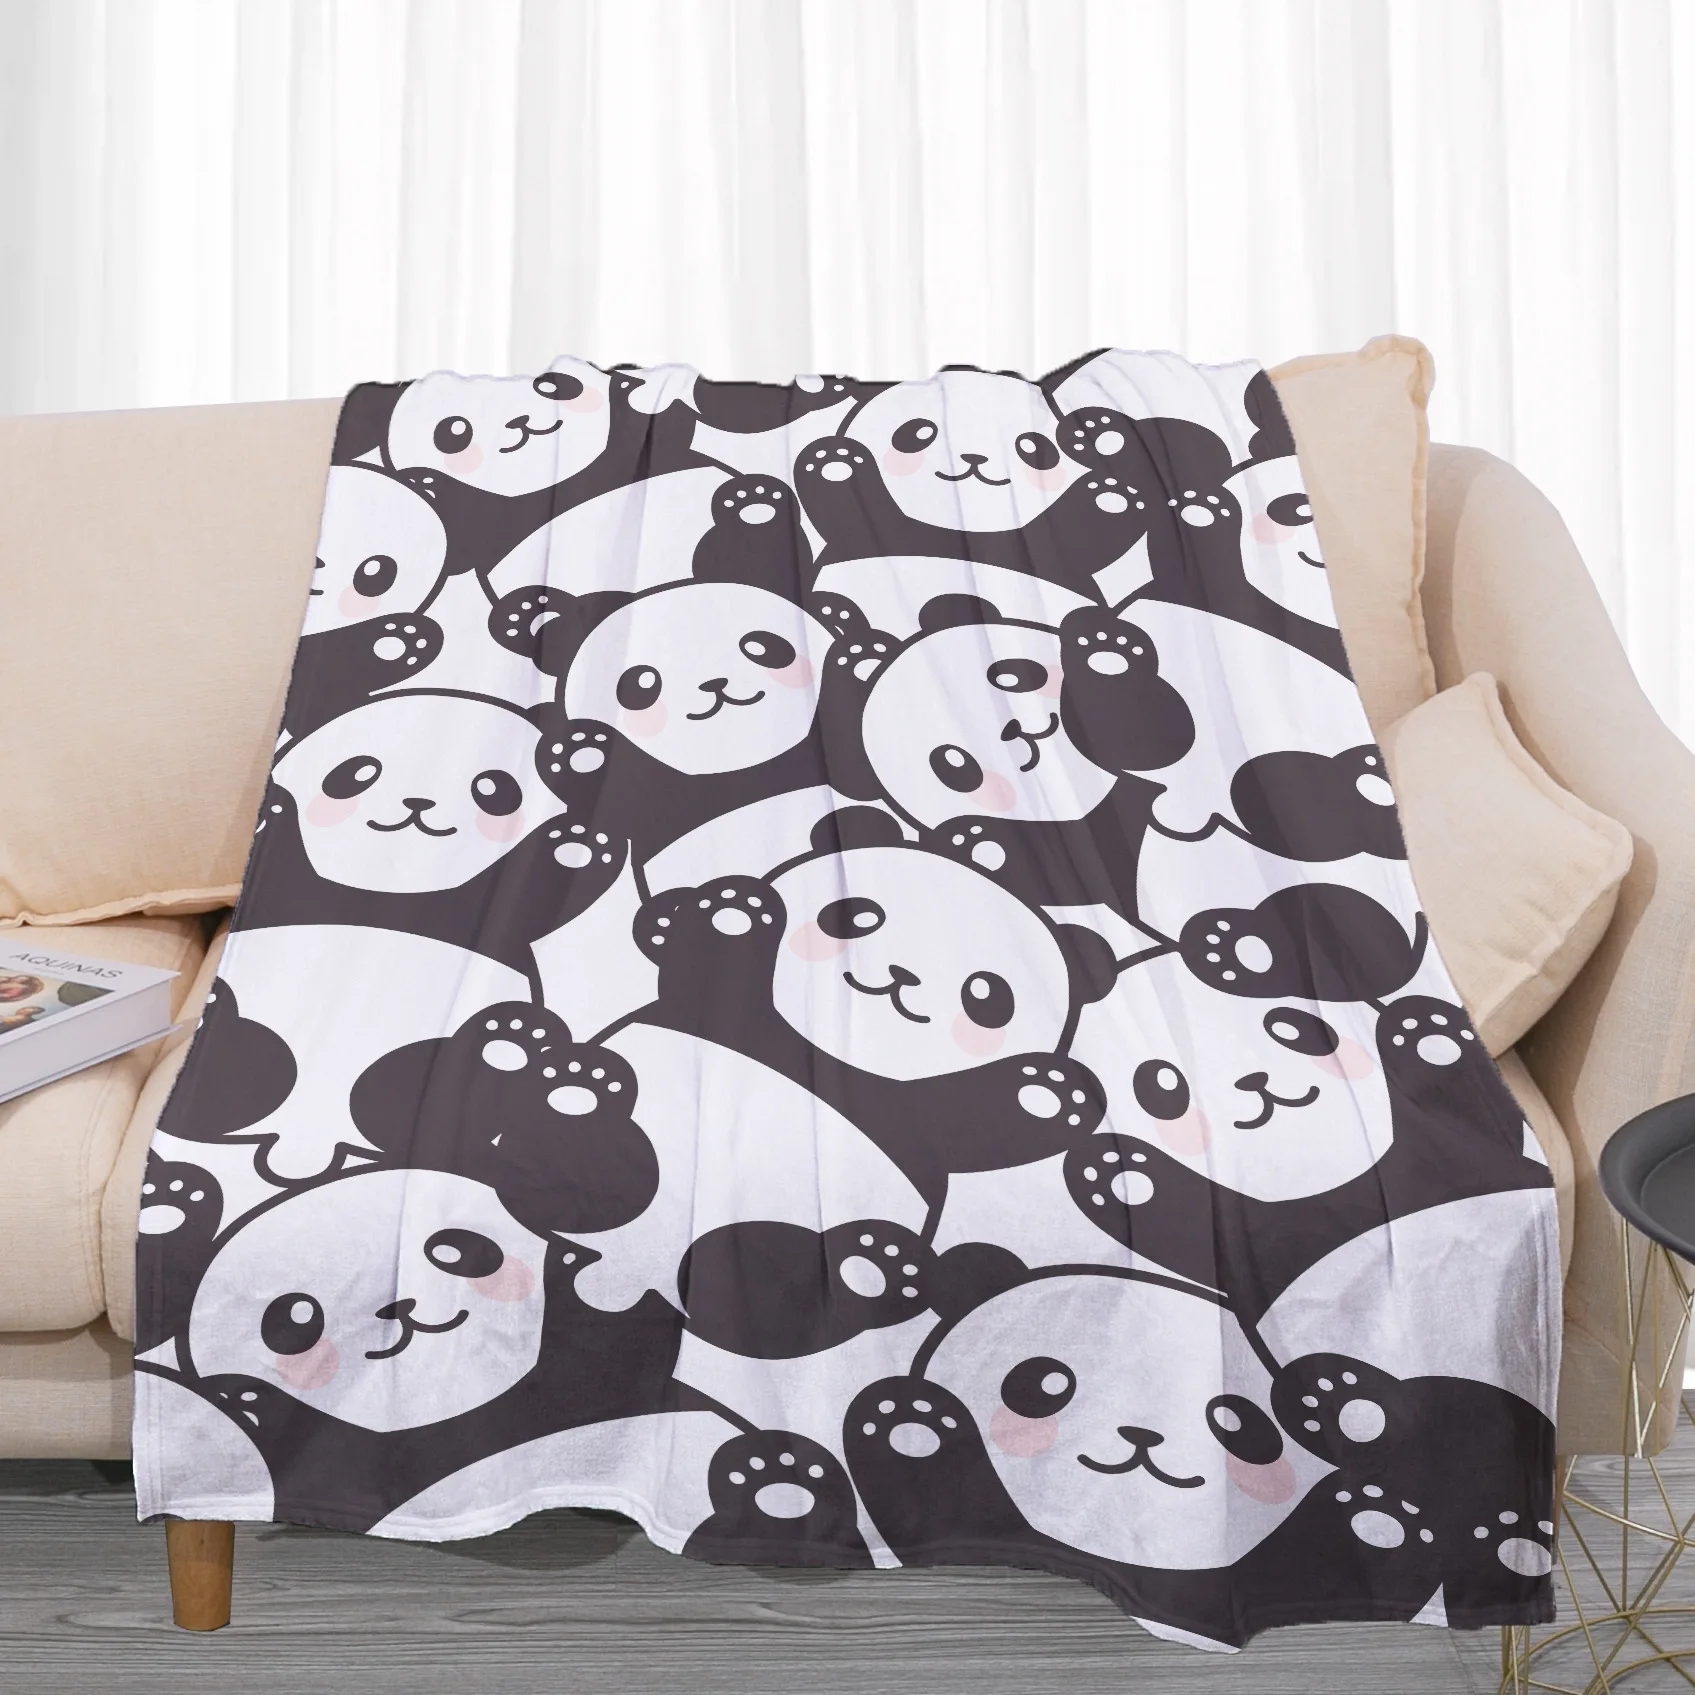 

Panda Eating Bamboo Dab Dance Blanket Soft Throw Bedspread Beach Warm Travel Flannel Cover for Bed Sofa одеяло 200x150